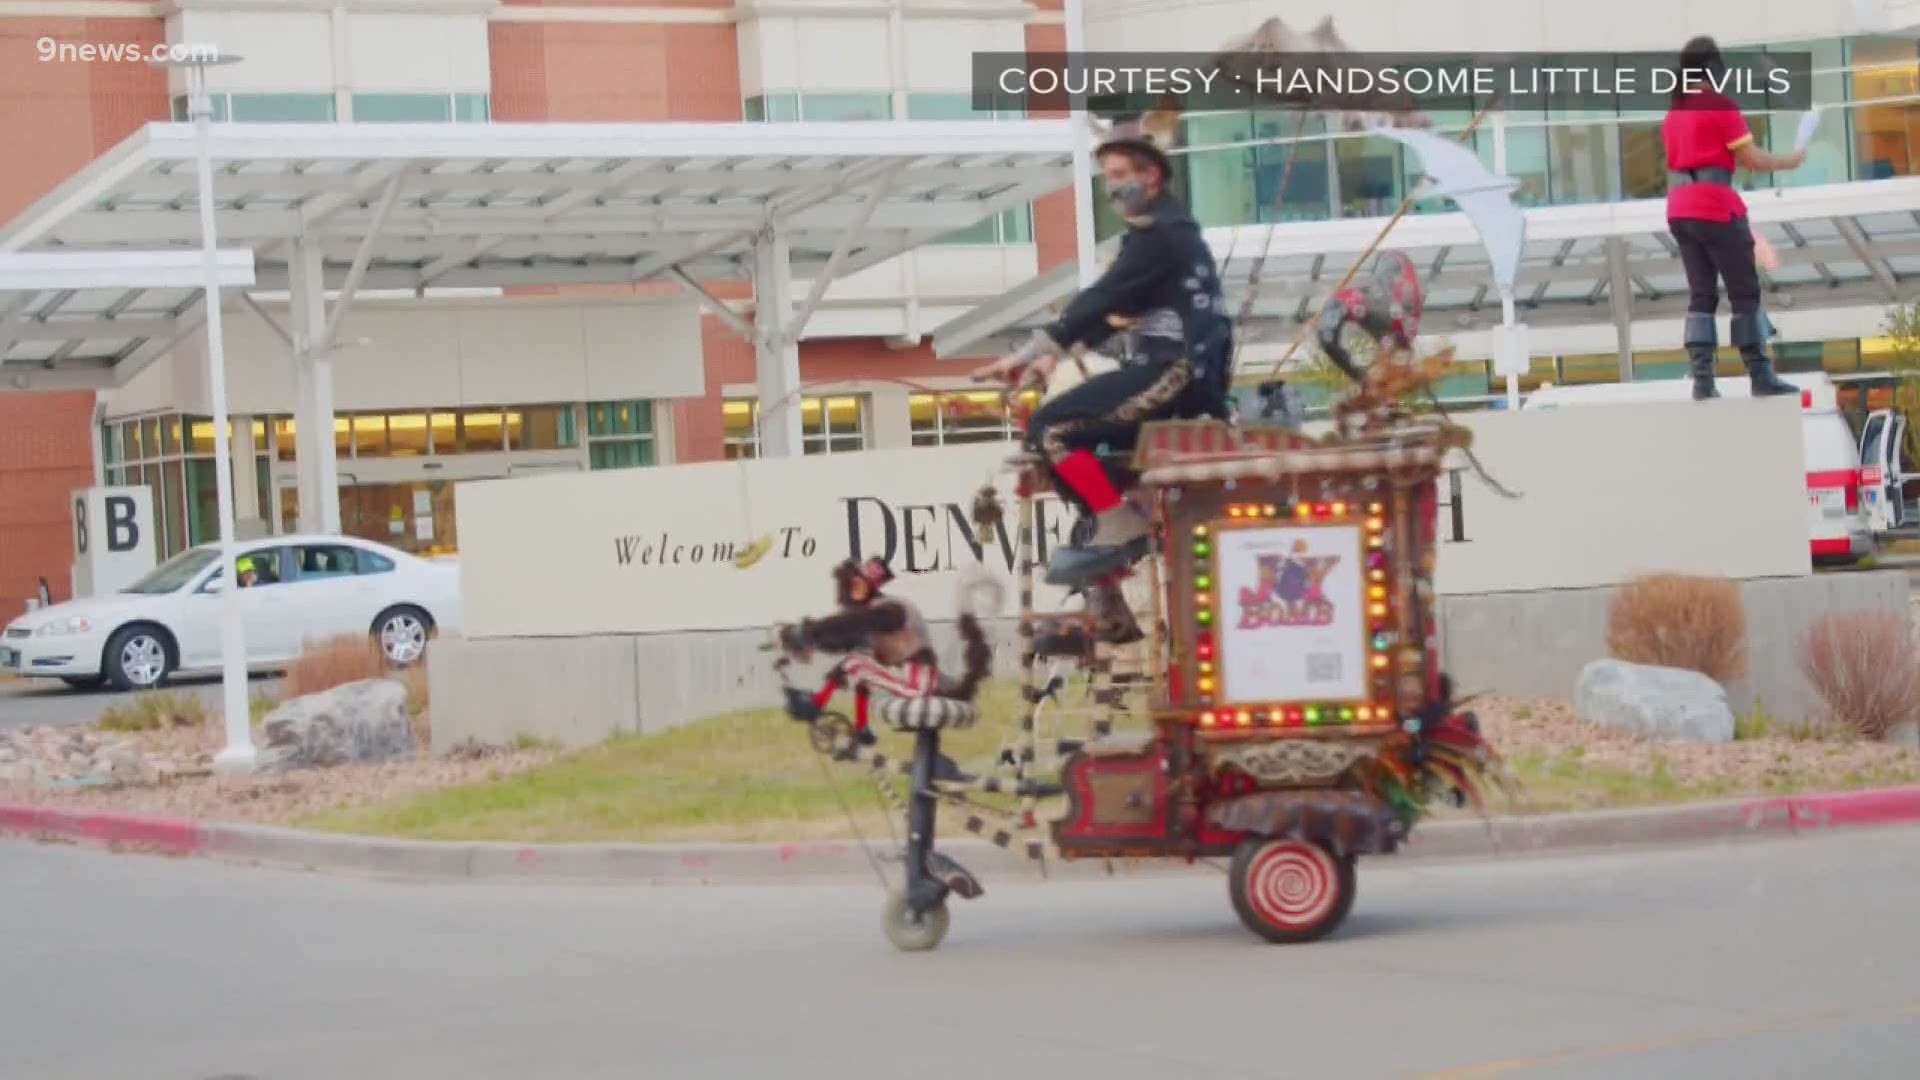 Handsome Little Devils recently performed outside Denver Health to spread a little joy to workers and patients.